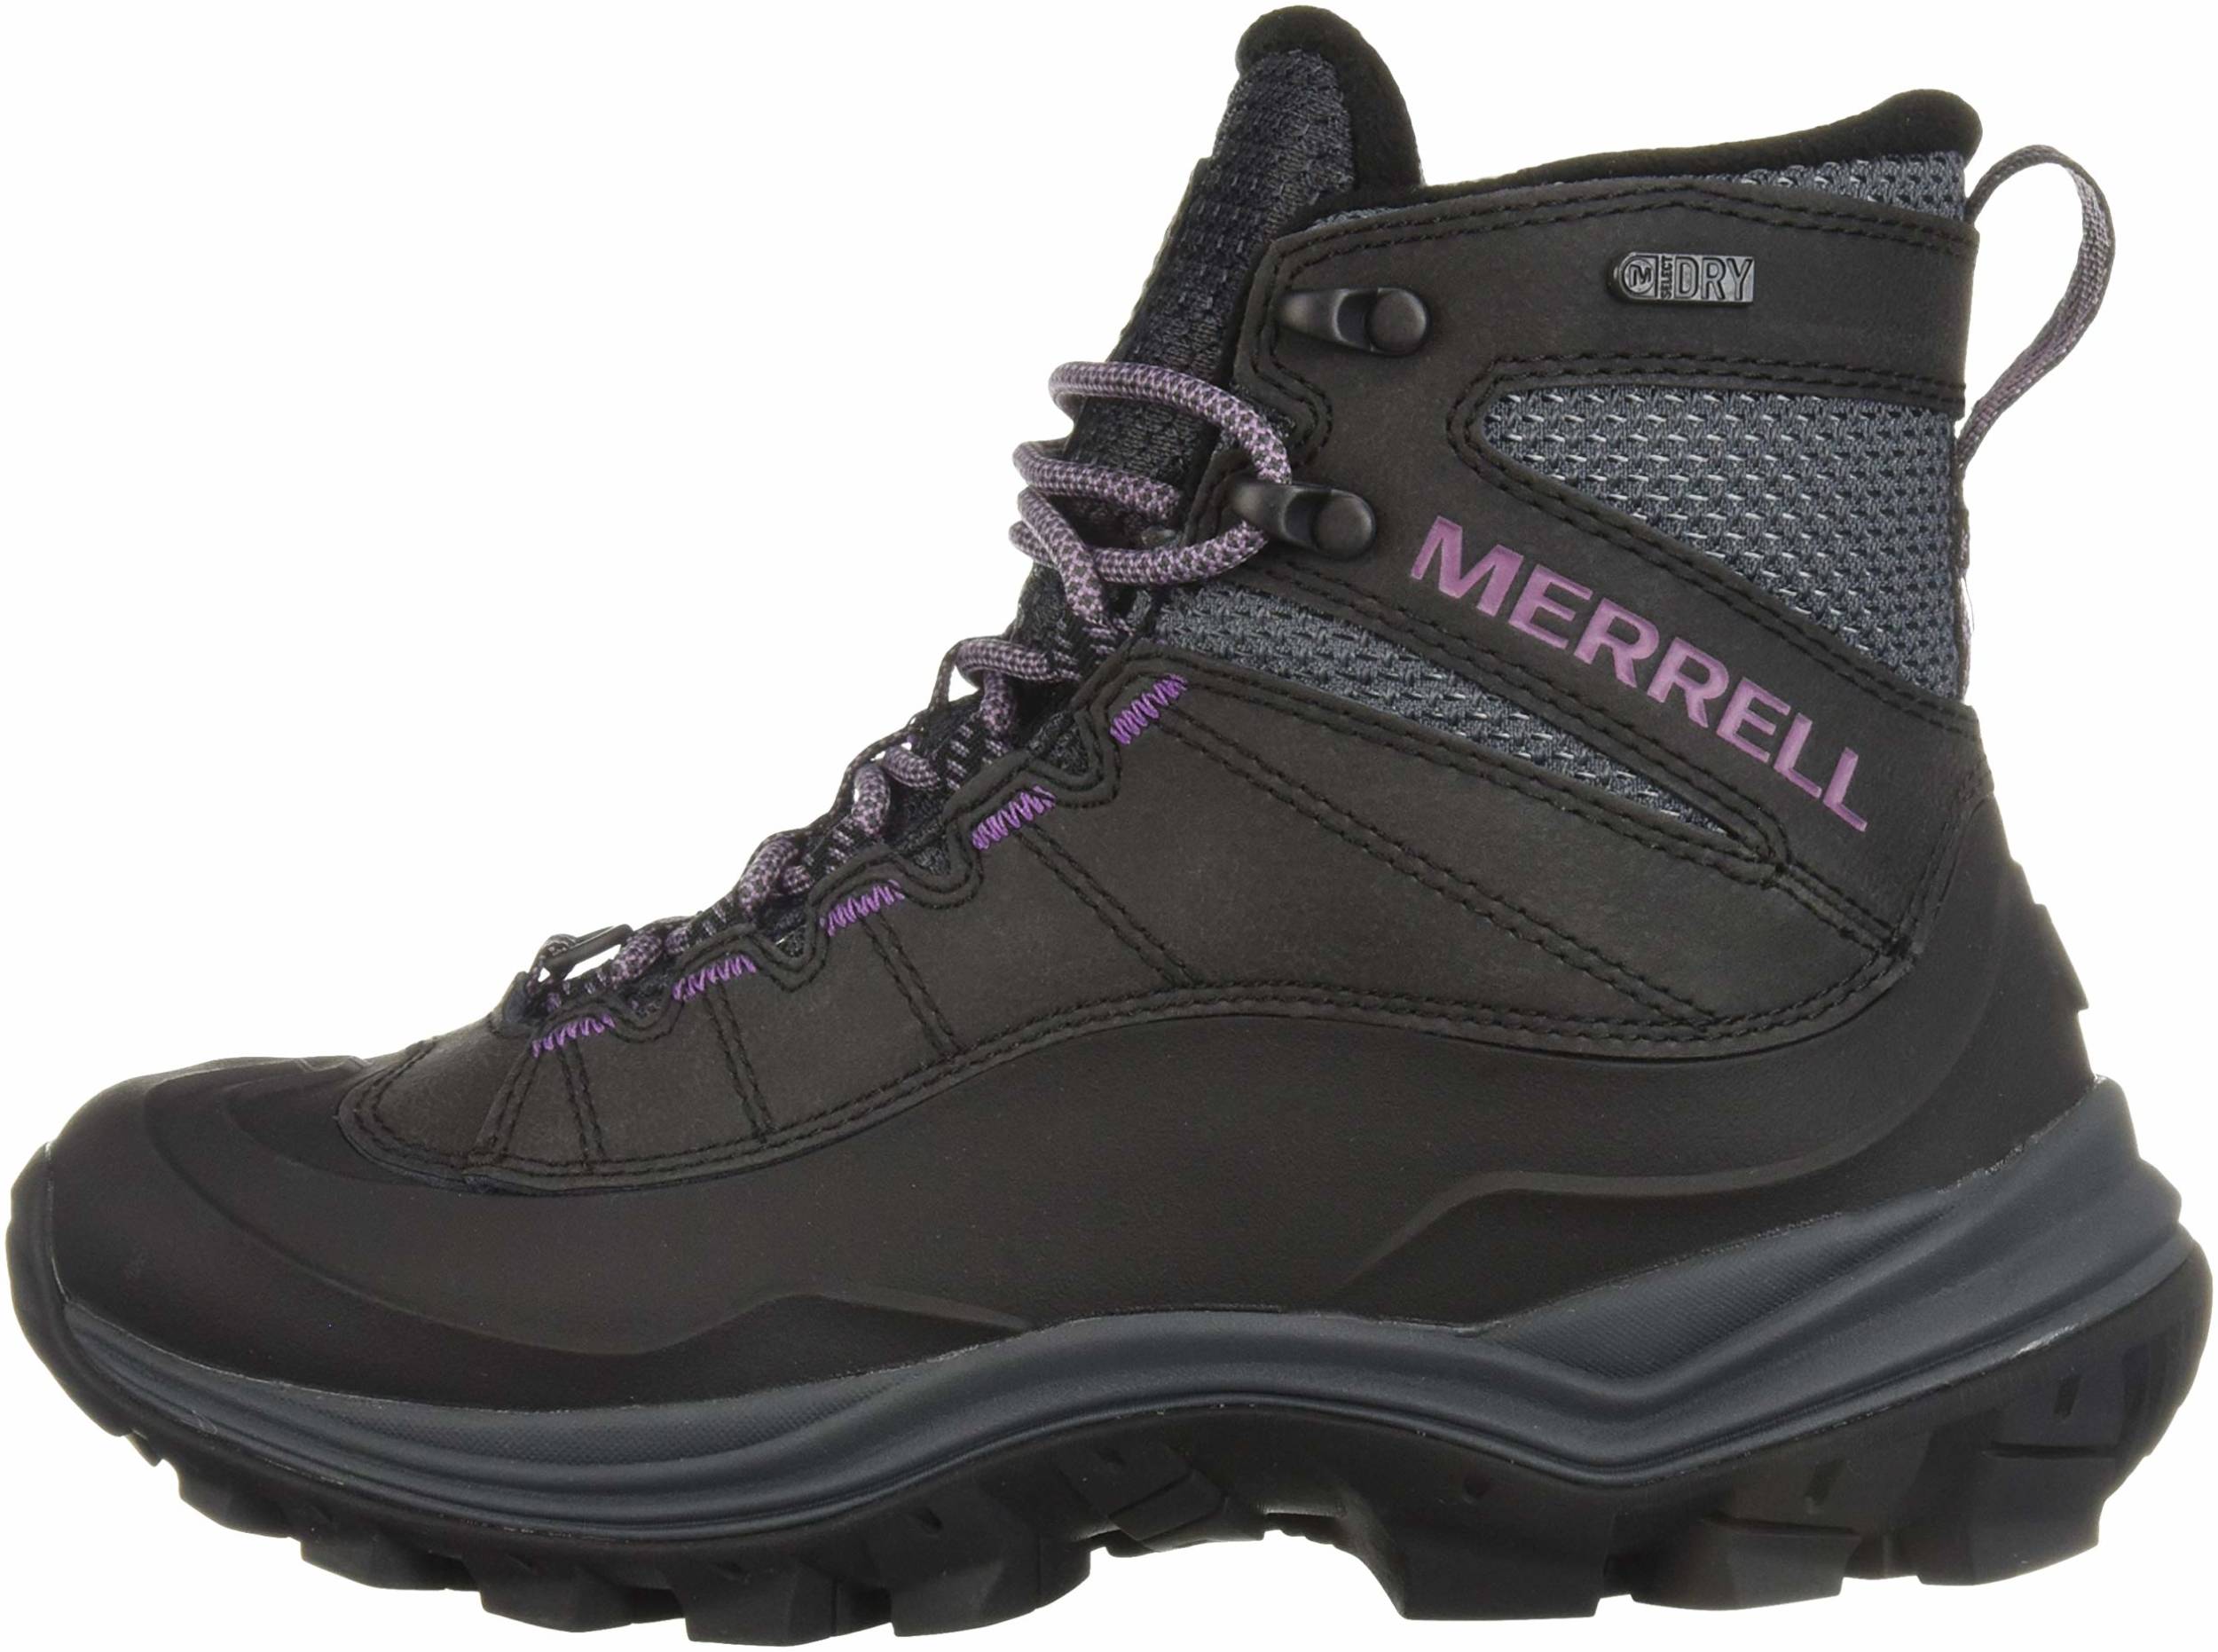 Only £73 + Review of Merrell Thermo 